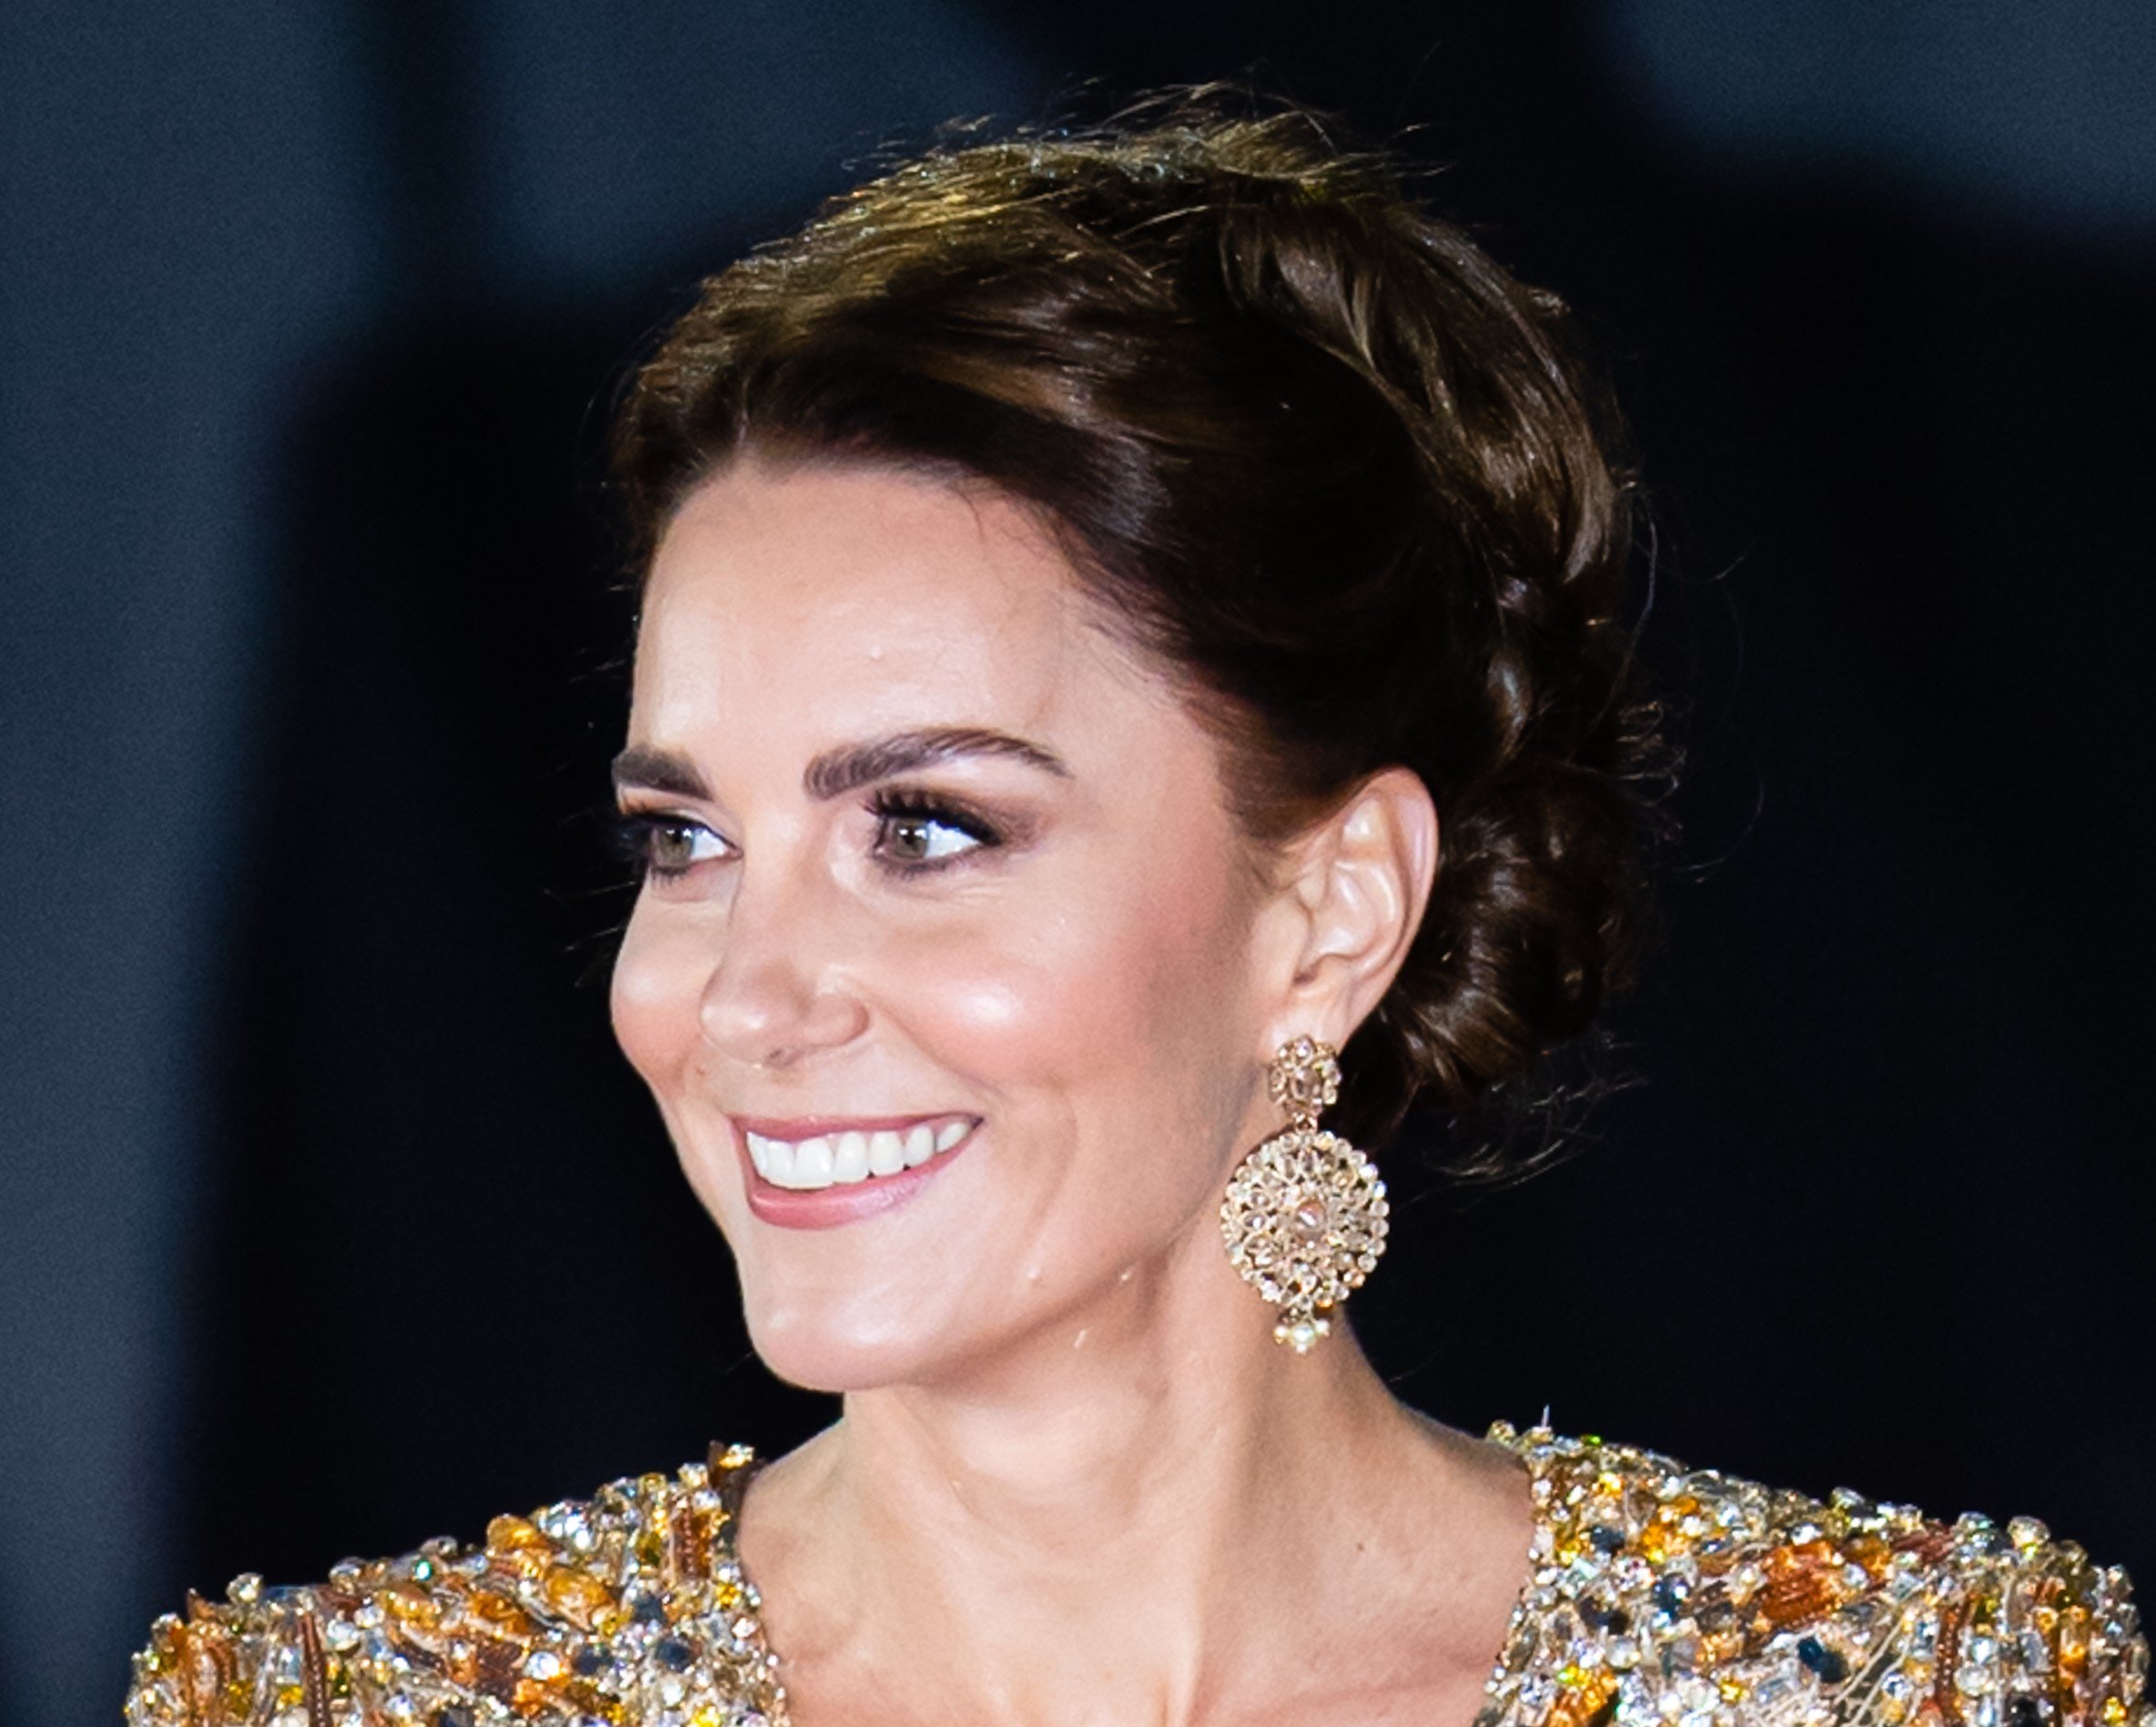 Kate Middleton smiling at the 'No Time To Die' world premiere